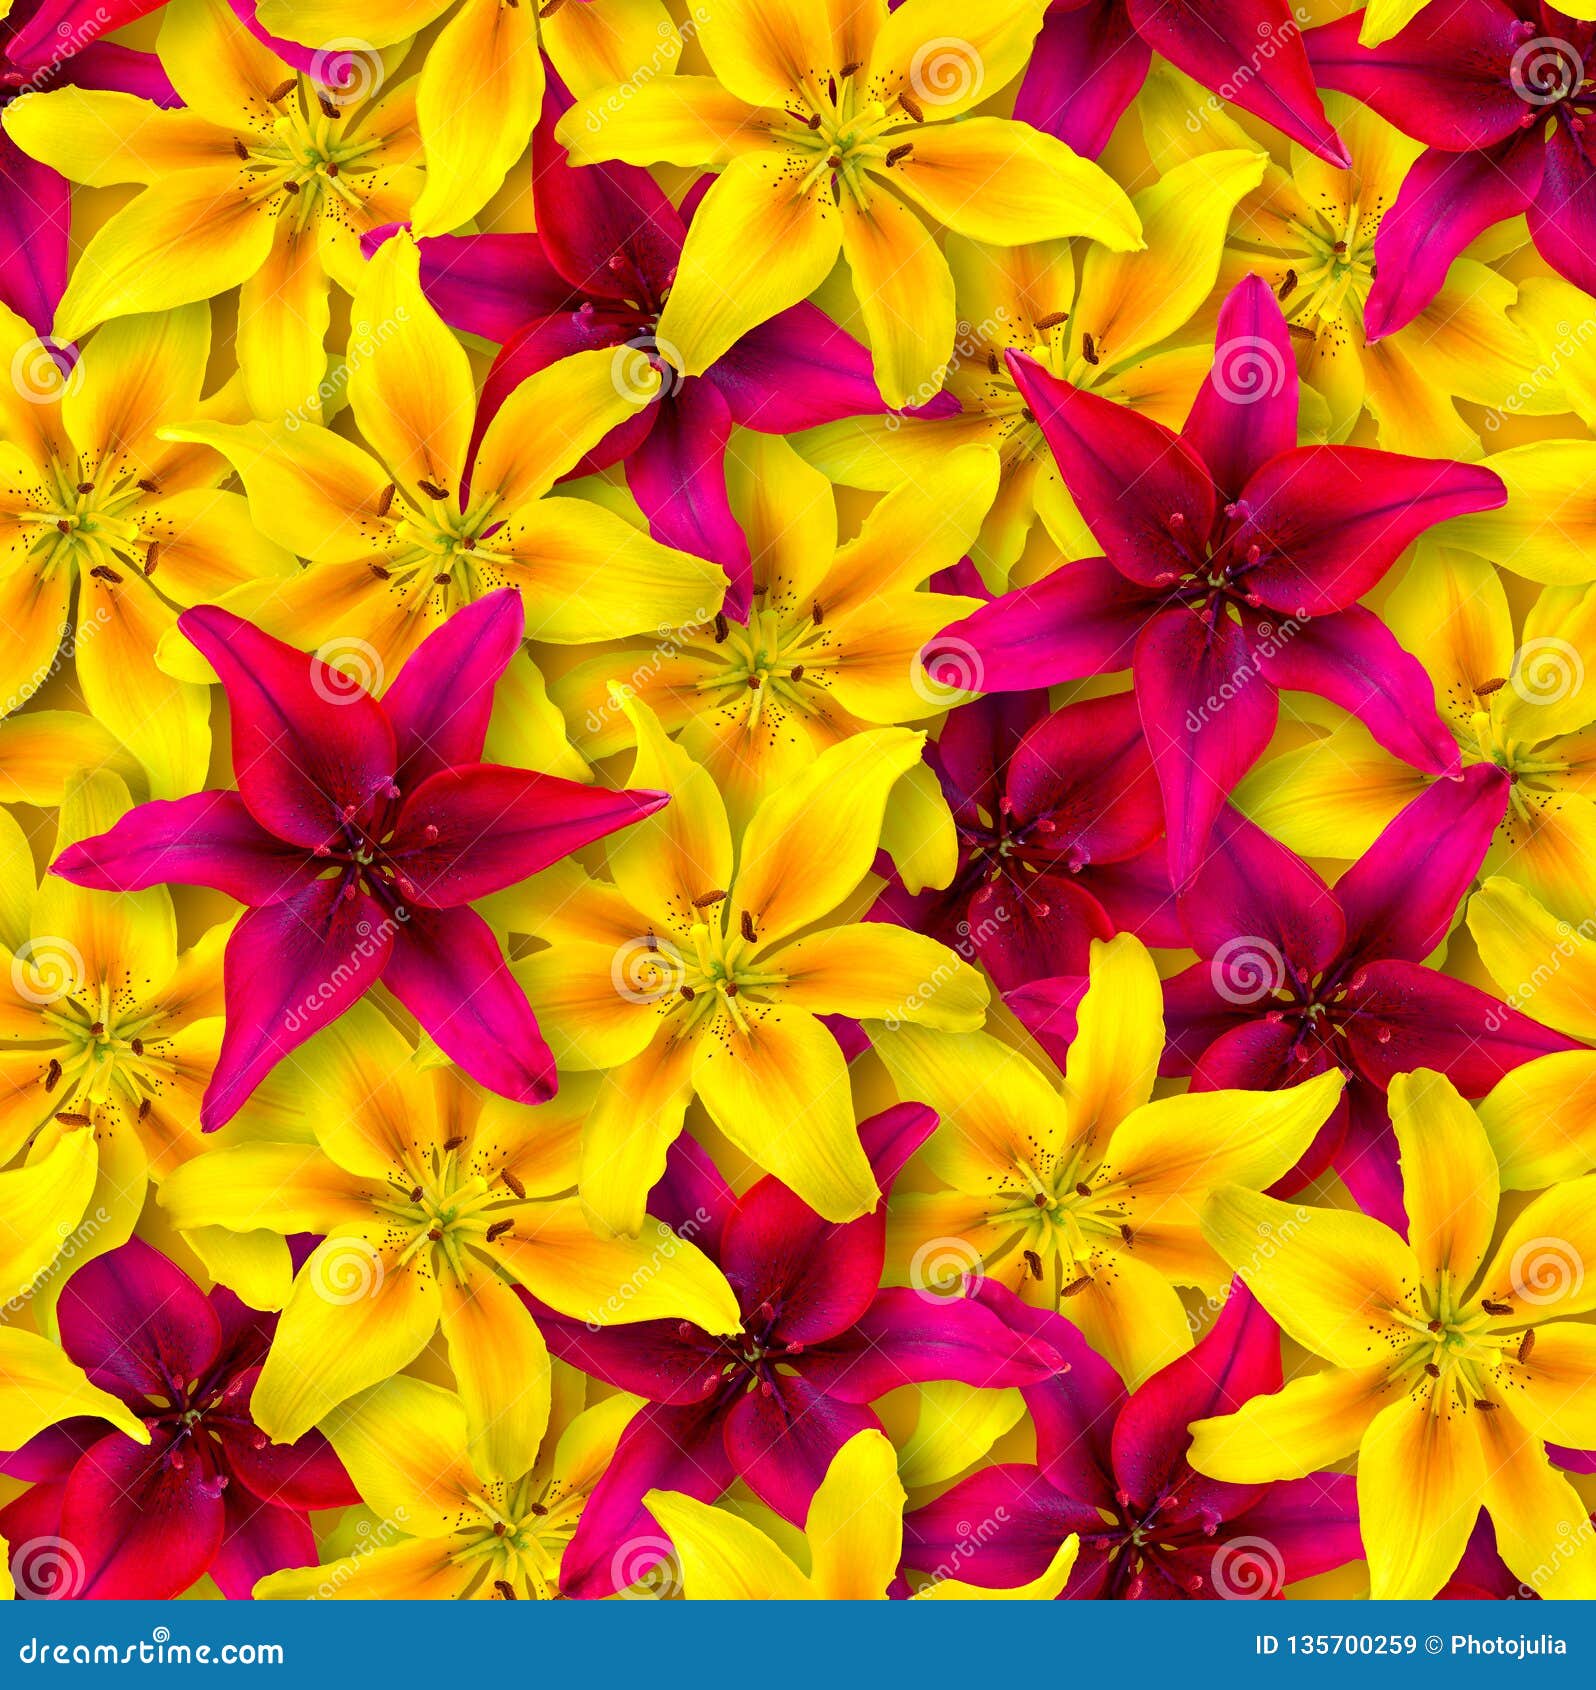 Various Red Flowers On Yellow Background Stock Photo Image Of Beautiful Concept 118617950